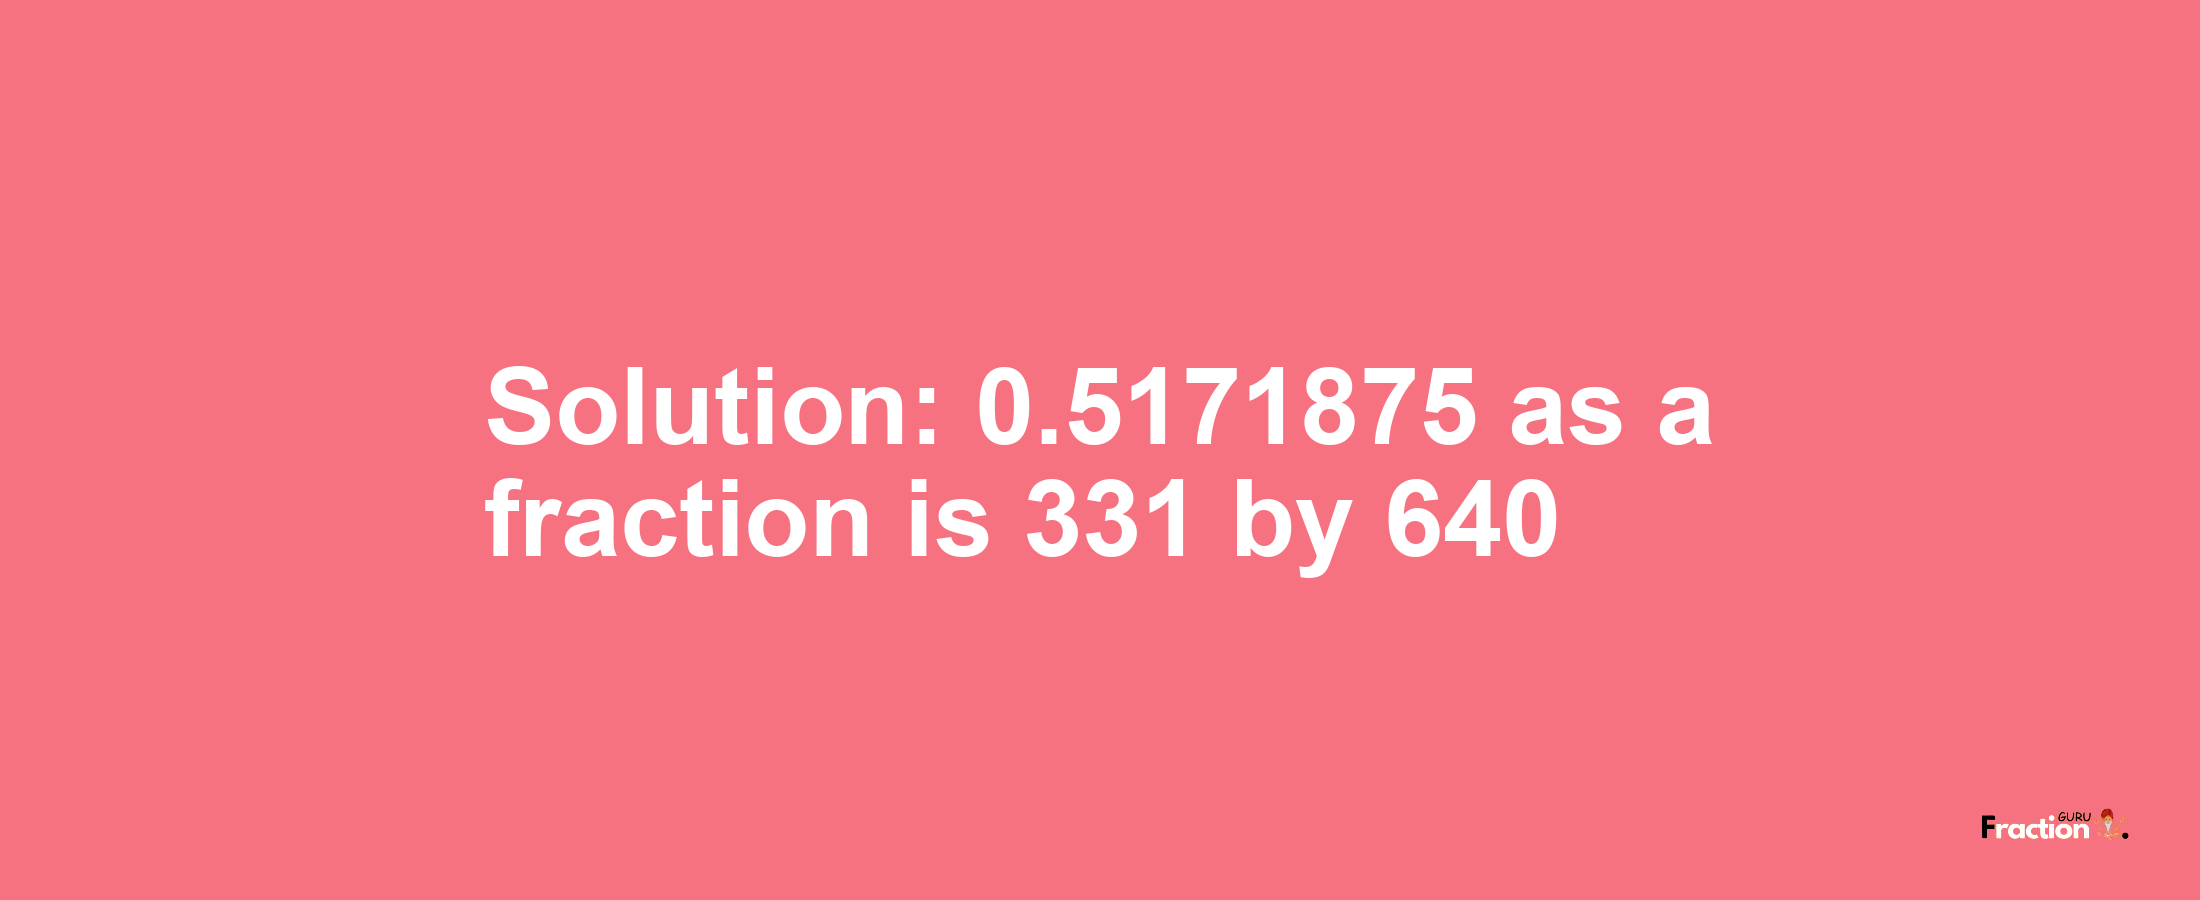 Solution:0.5171875 as a fraction is 331/640